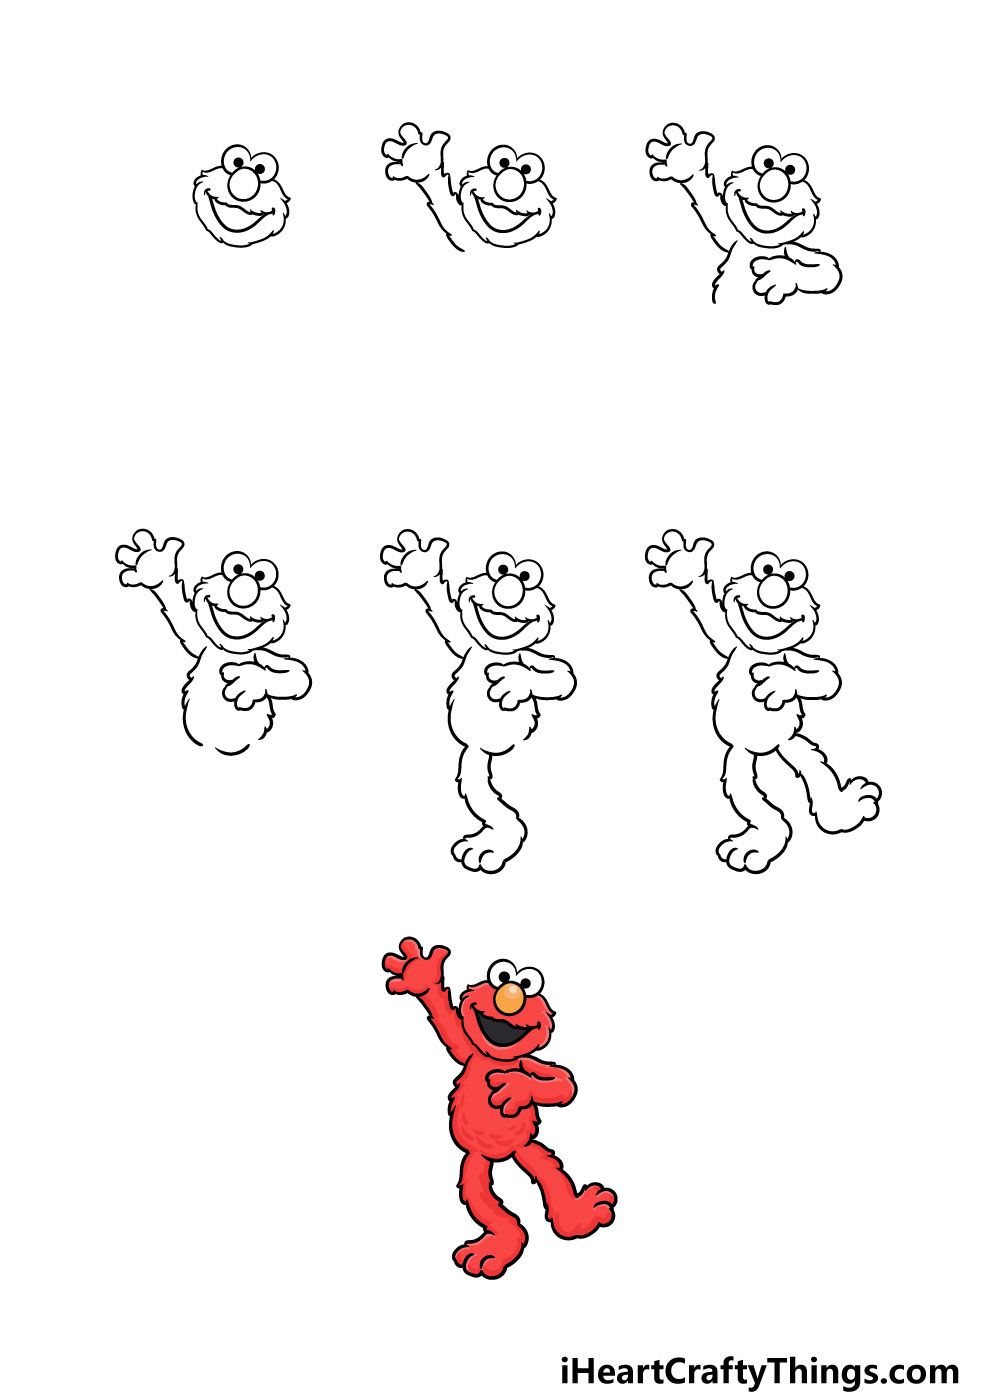 how to draw elmo in 7 steps